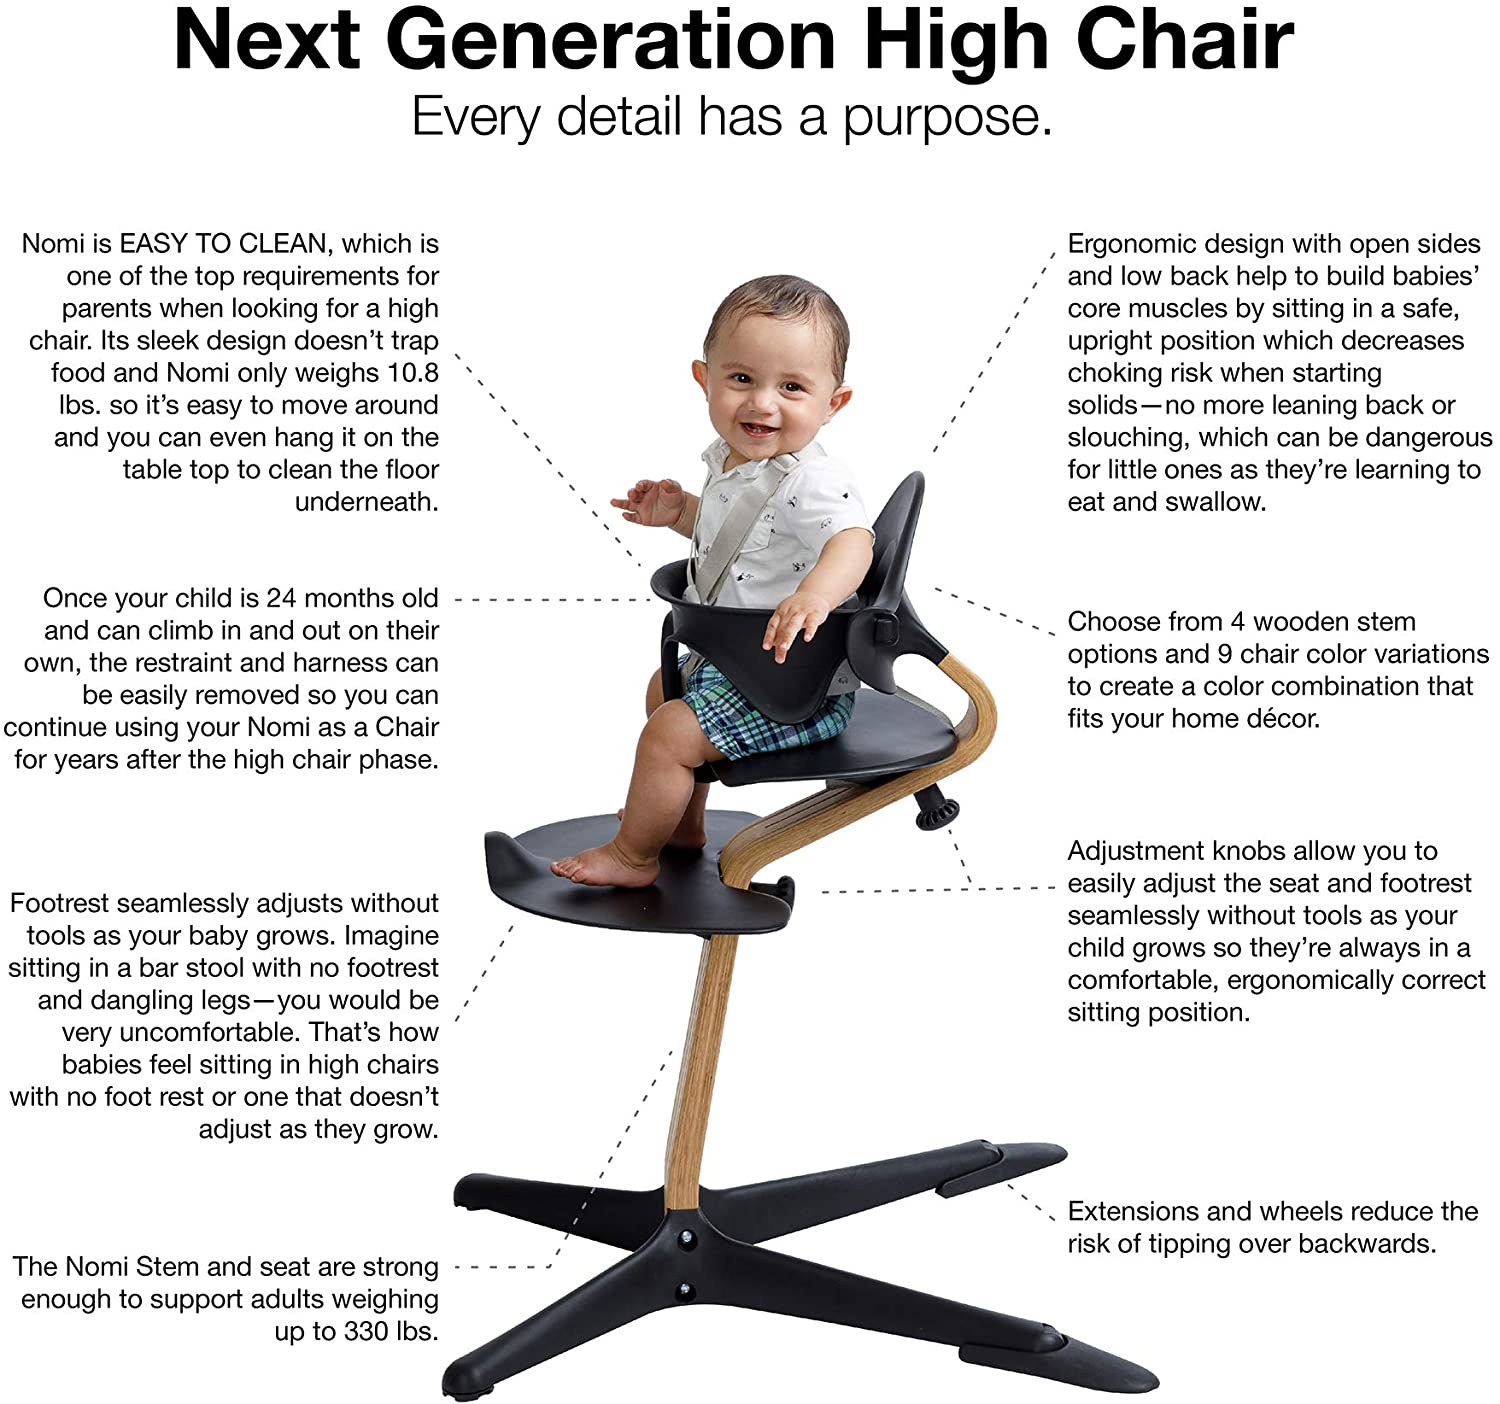 Going Up Front on the High Chair